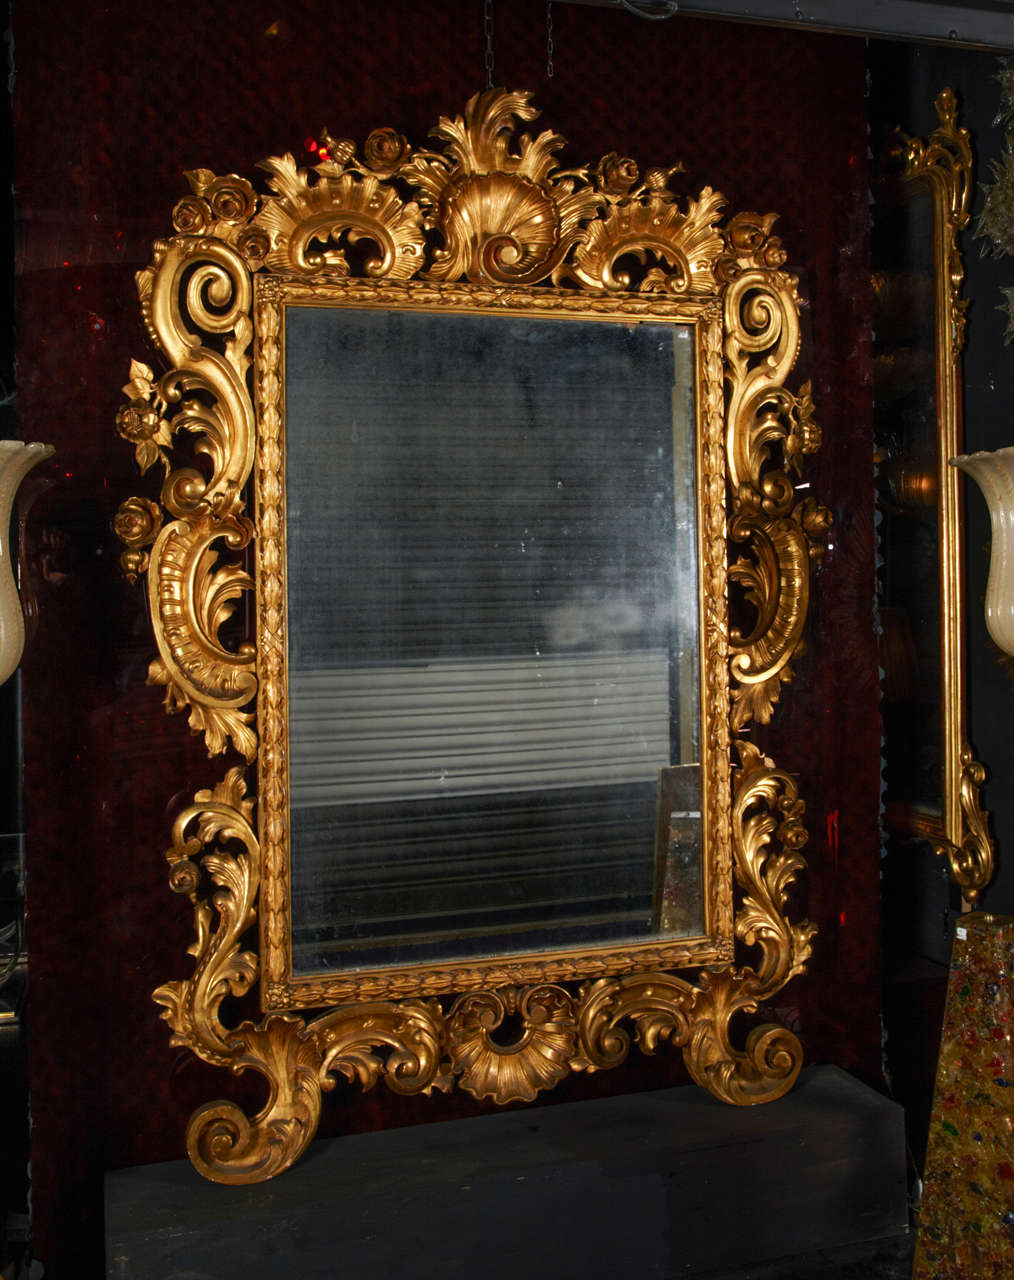 Exceptional mid 19th century huge Italian Baroque mirror.  The frame is in original gilt carved wood.  Perfect condition.  The mirror original too.